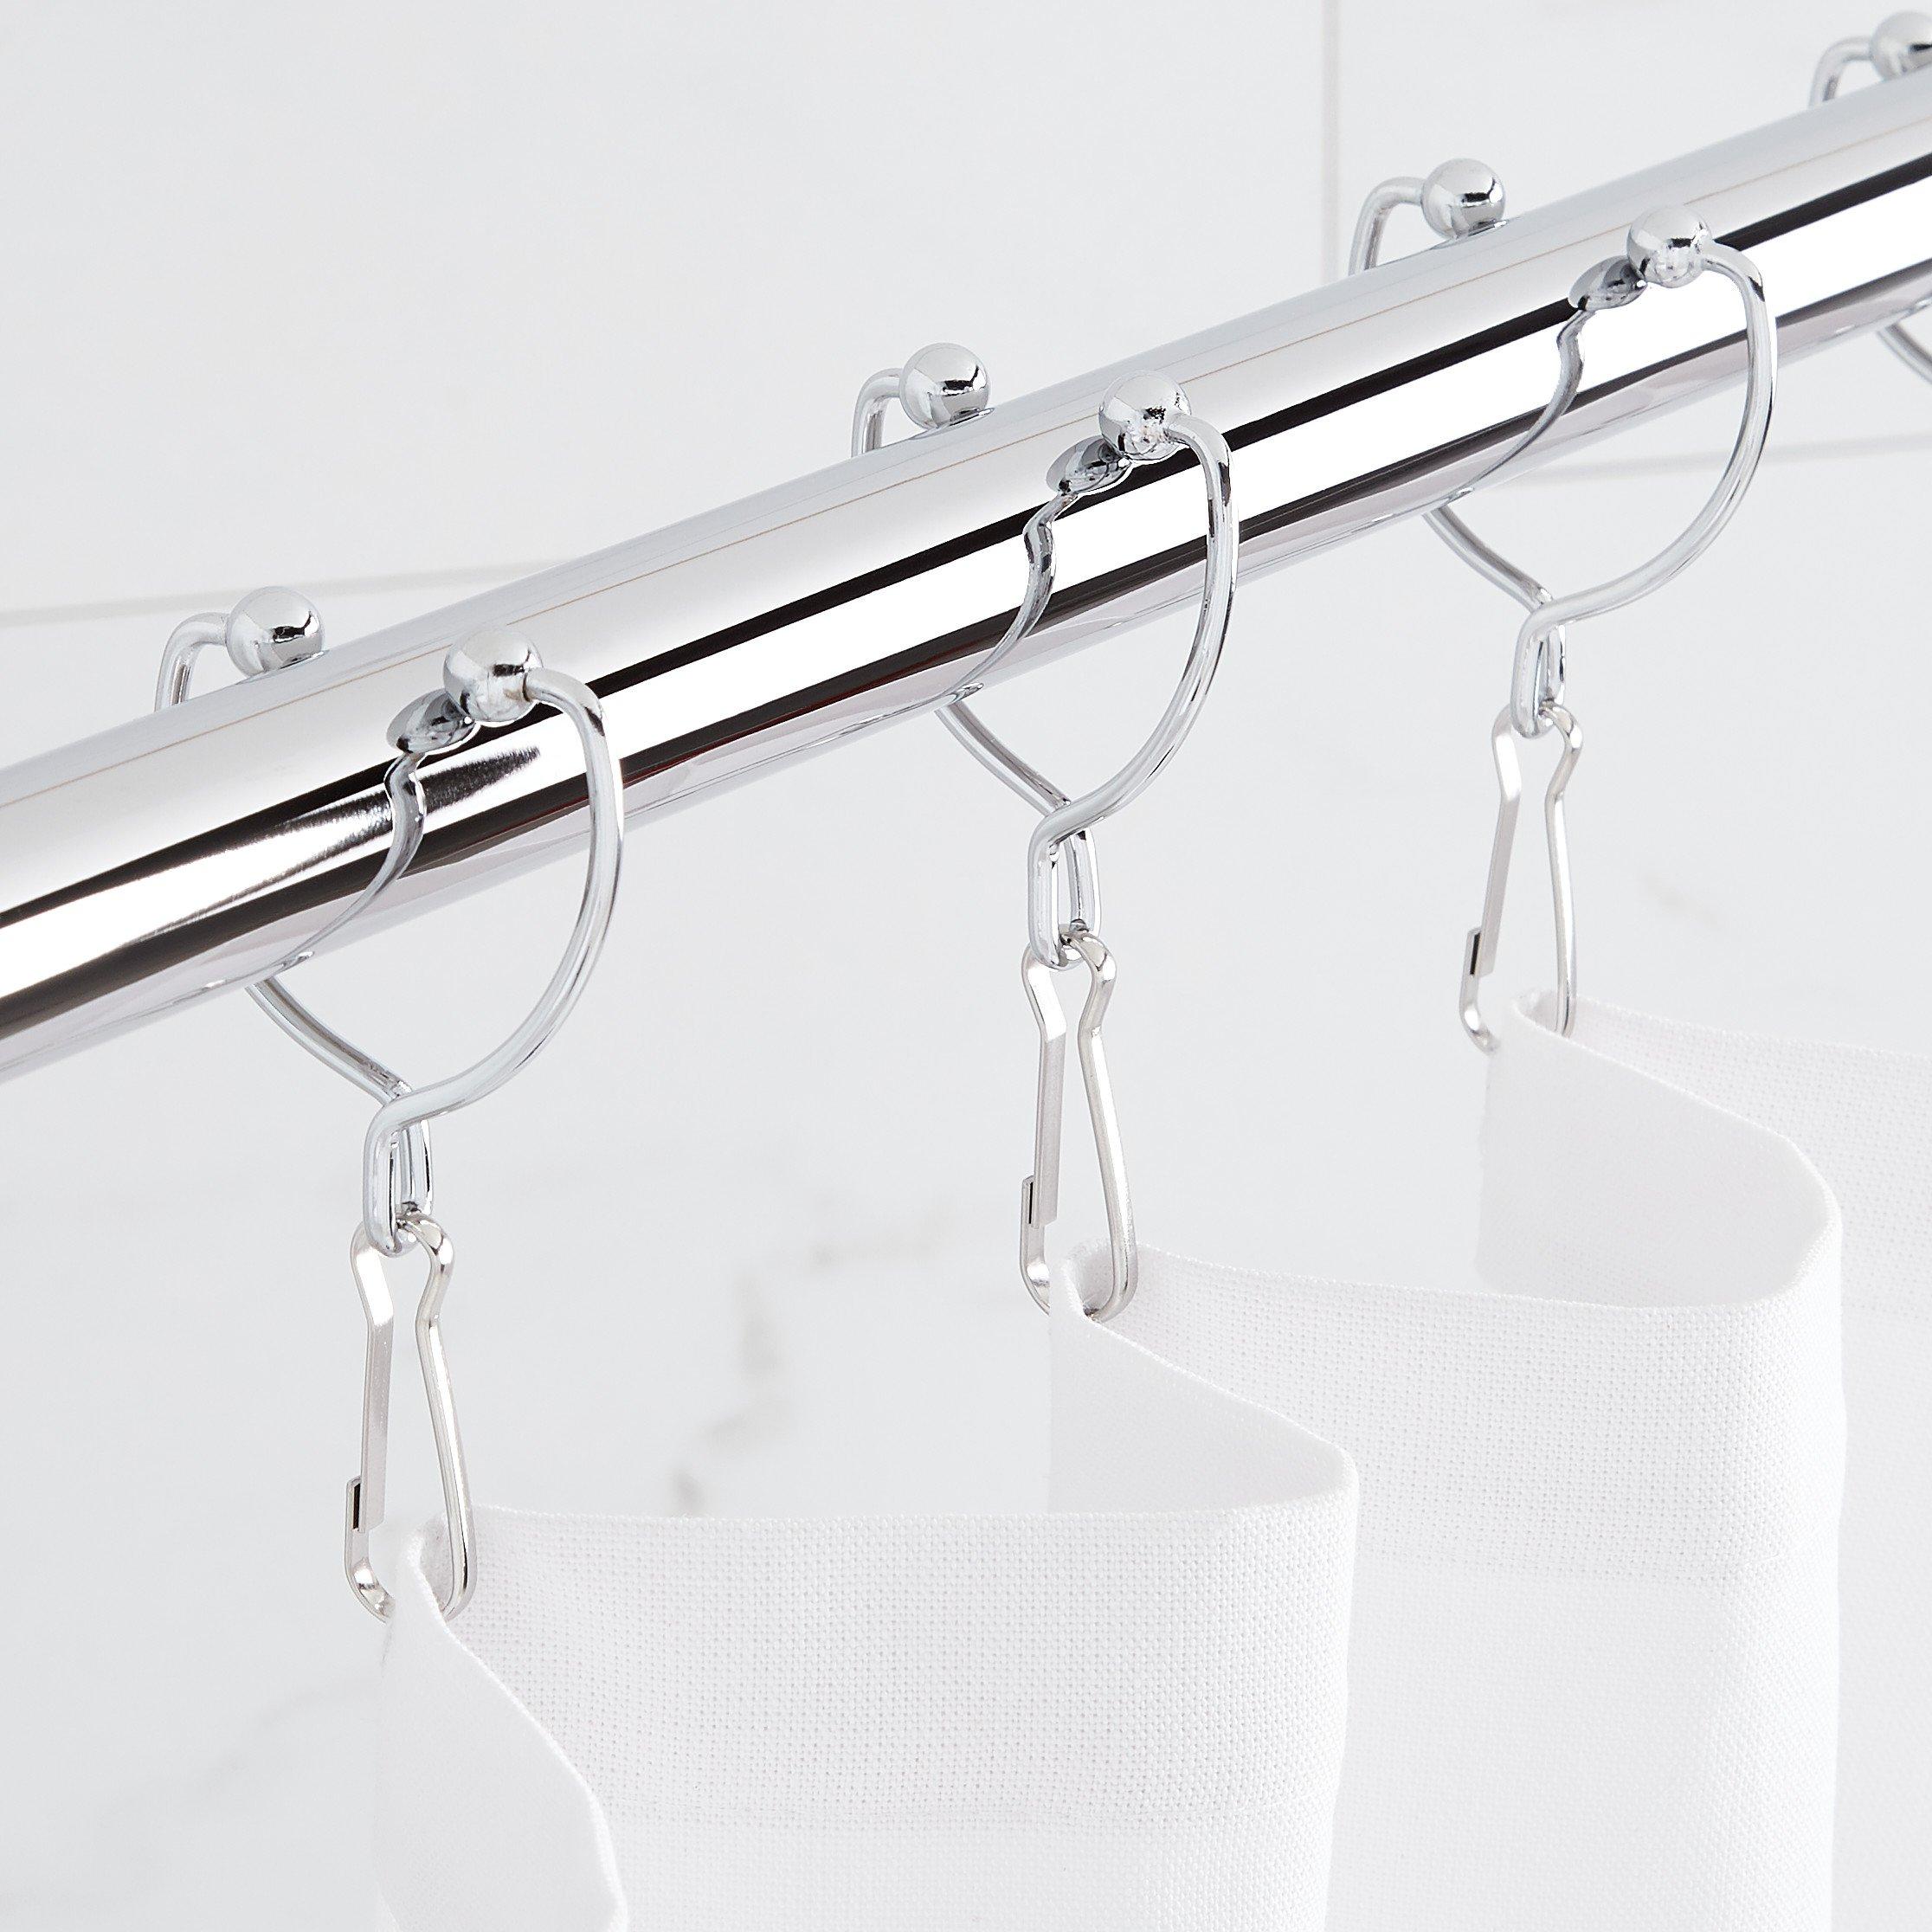 Shower Curtain Rings | Rowley